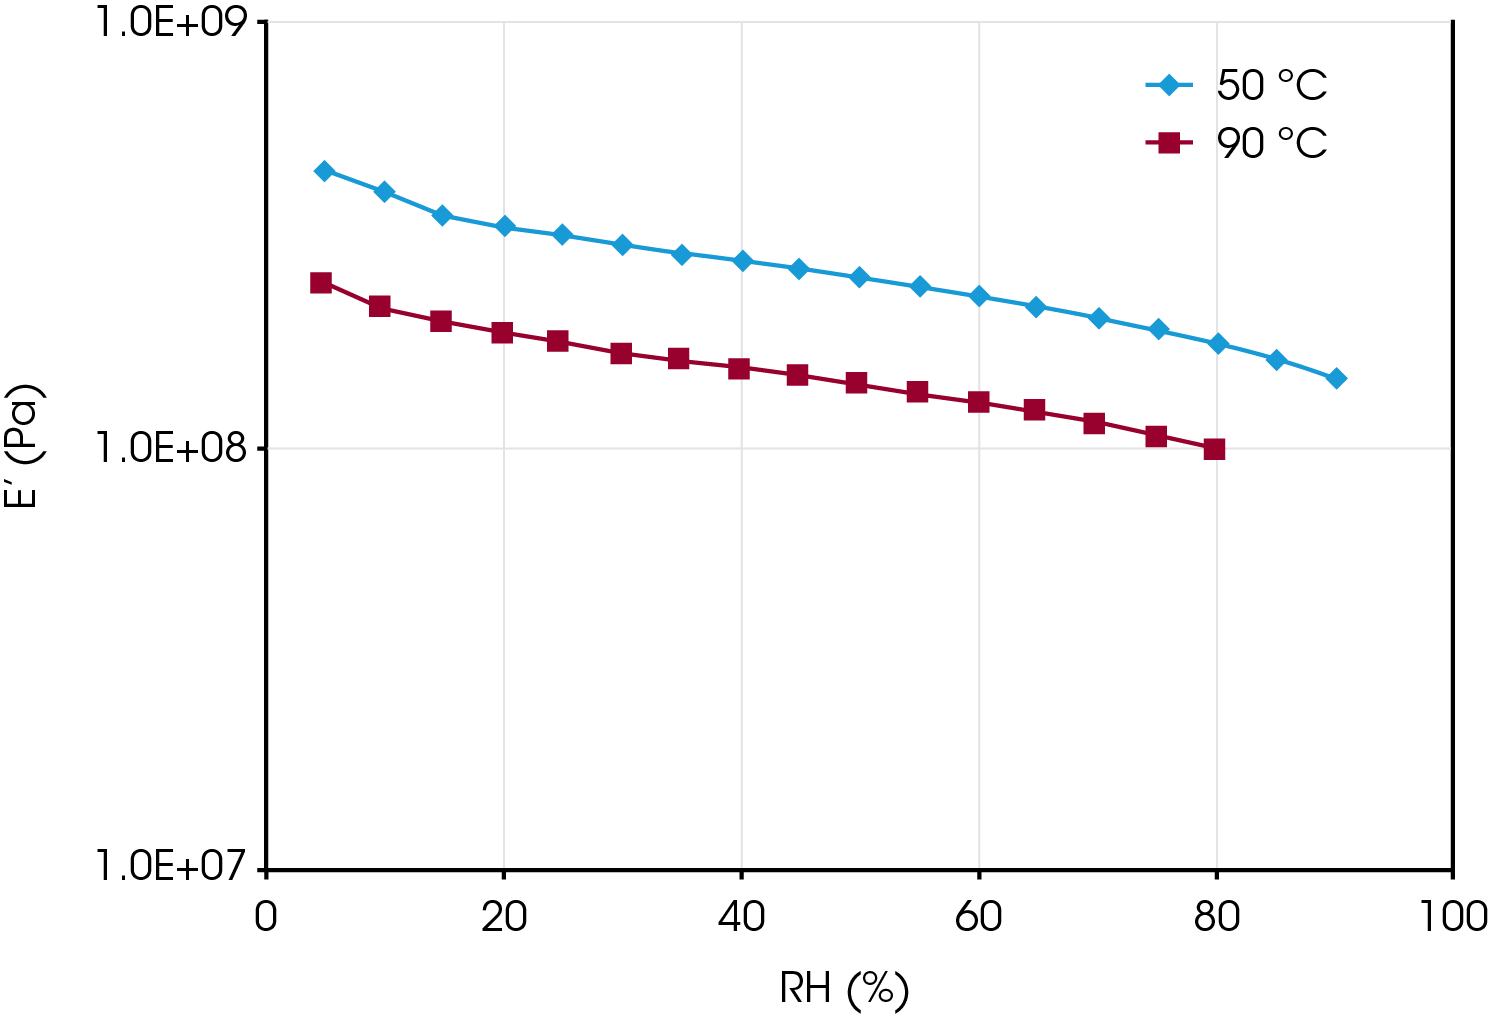 Figure 7. Dynamic mechanical tests of PFSA film. Monitoring the changes of storage modulus (E’) as a function of environmental humidity. Blue: 50 °C; and Red: 90 °C.